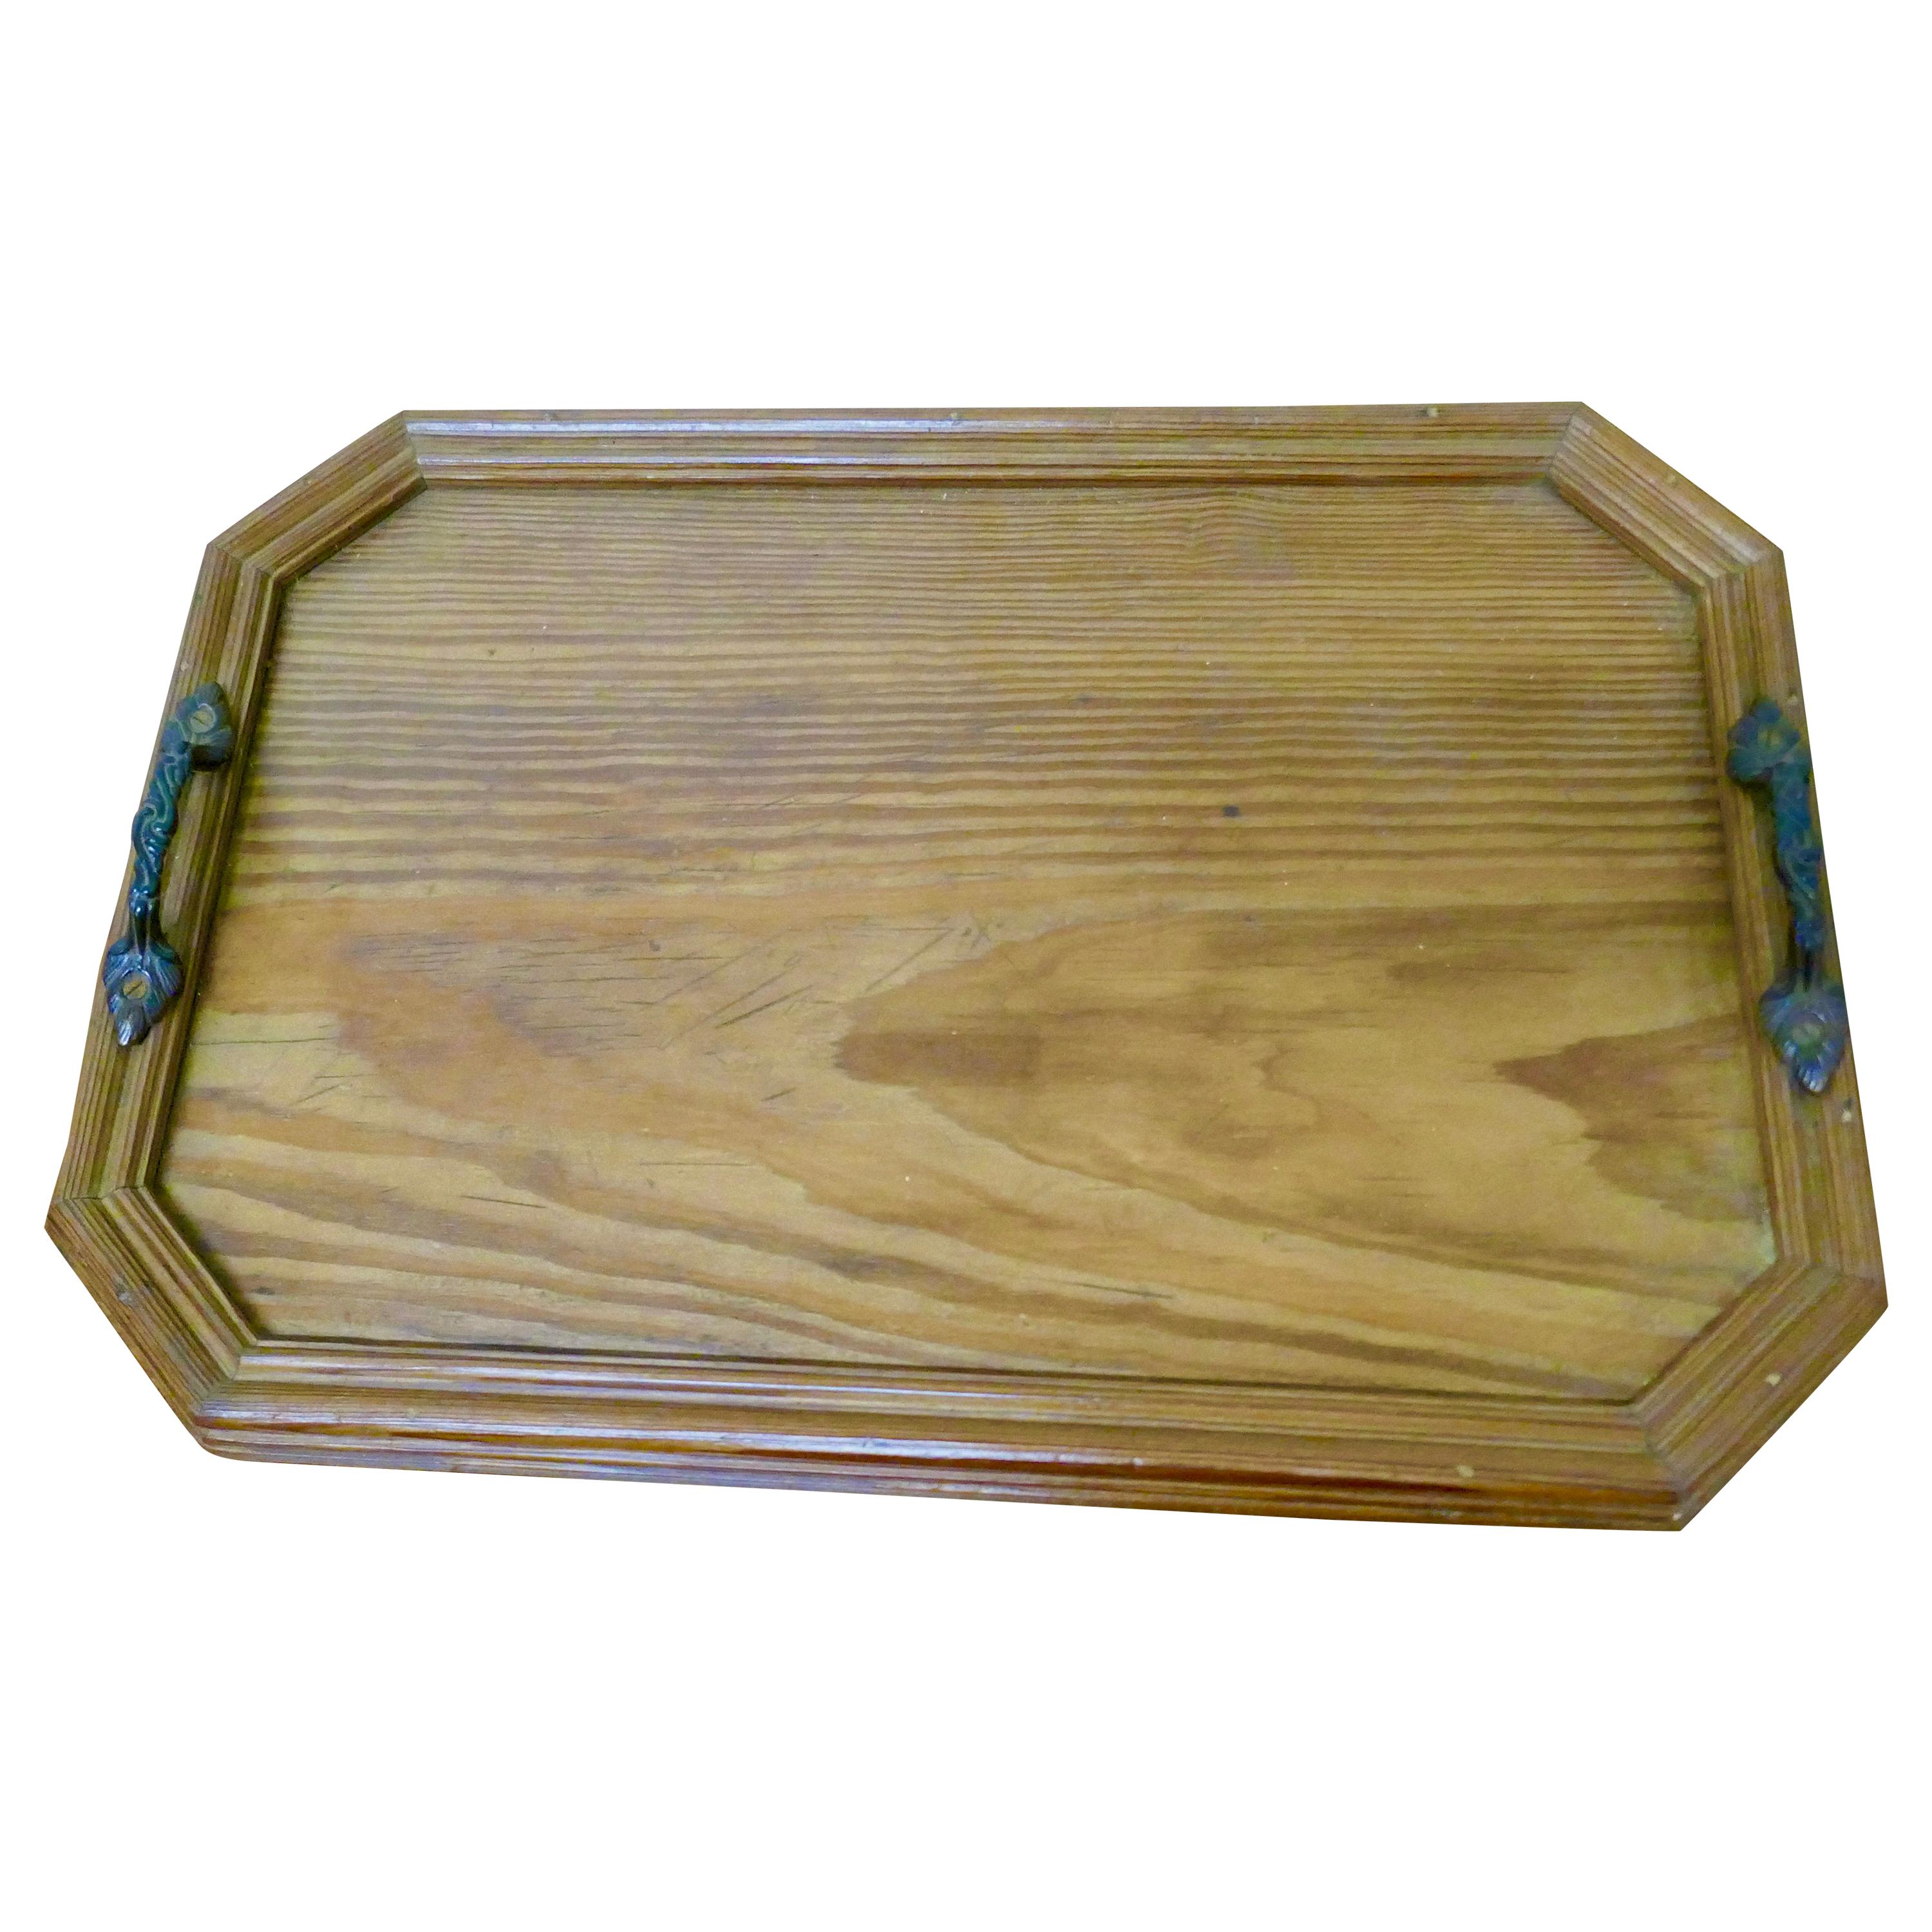 Pitch Pine Country Tray For Sale